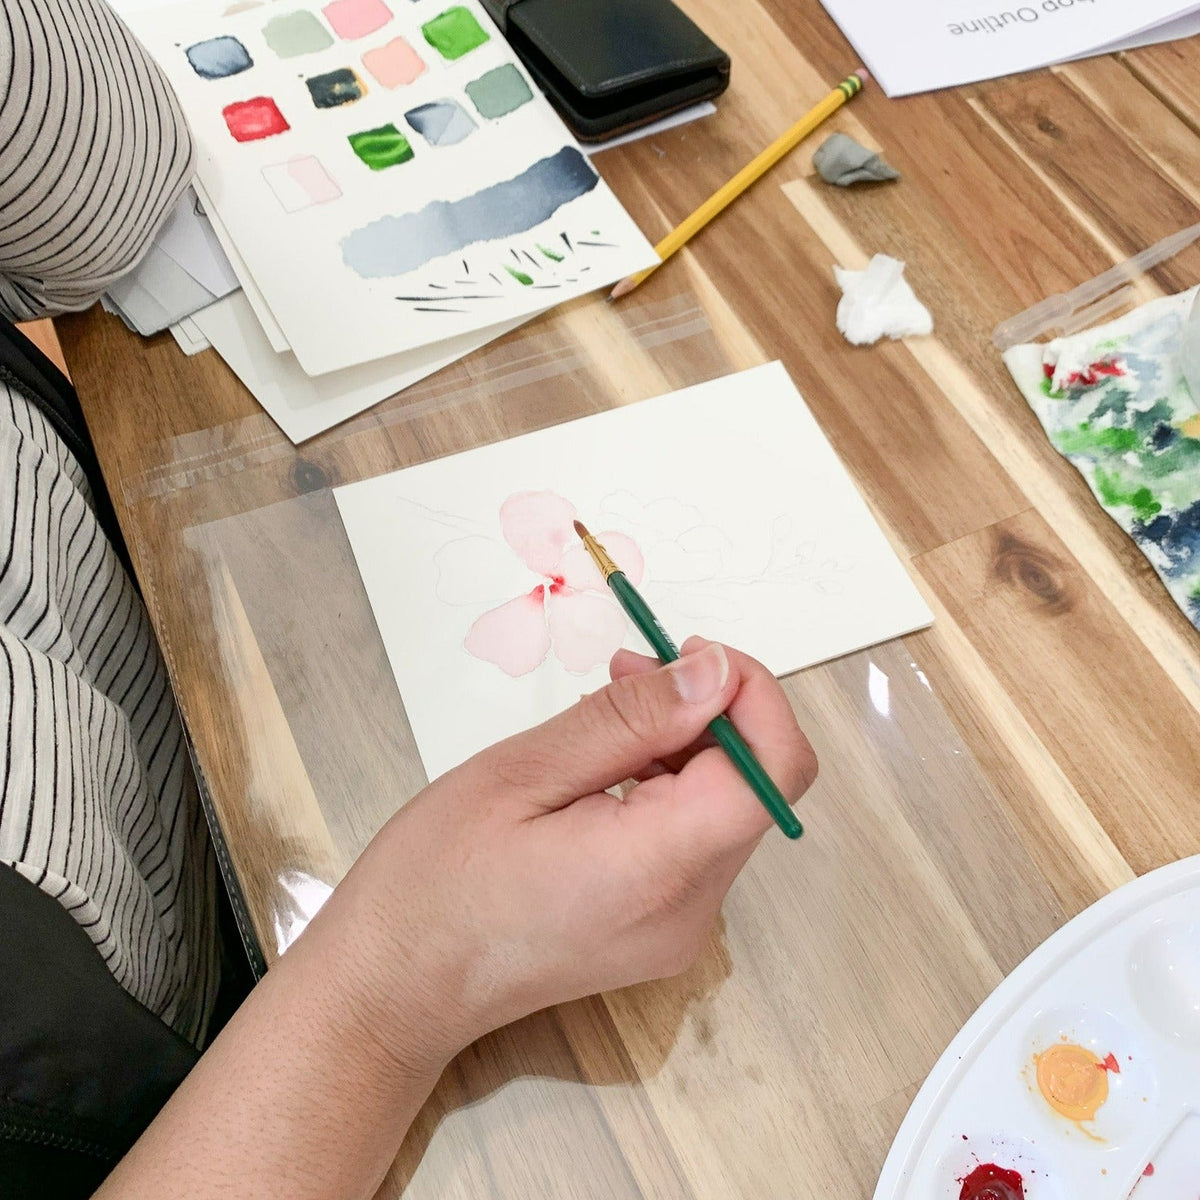 House Plant Beginner Watercolor Workshop - May 6th from 12-2:30 pm. - Gift & Gather